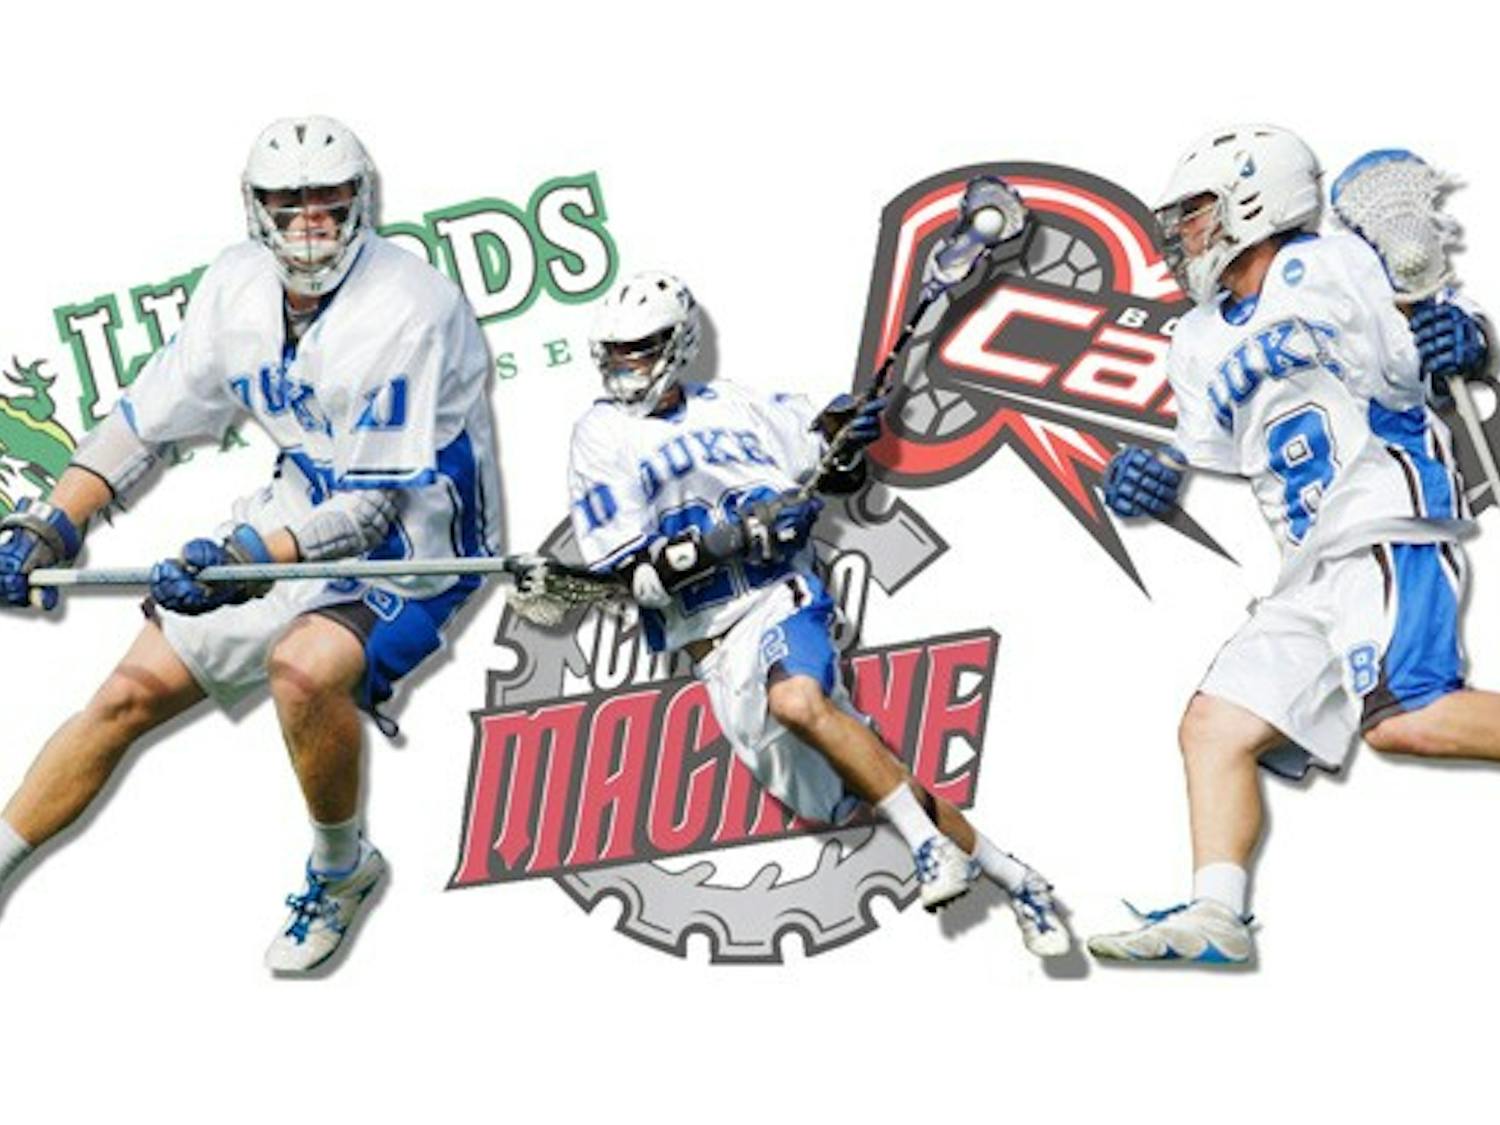 Defenseman Parker McKee, drafted by the Long Island Lizards, Ned Crotty, taken by the Chicago Machine and Max Quinzani, picked by the Boston Cannons, will continue their lacrosse careers in the MLL next season.